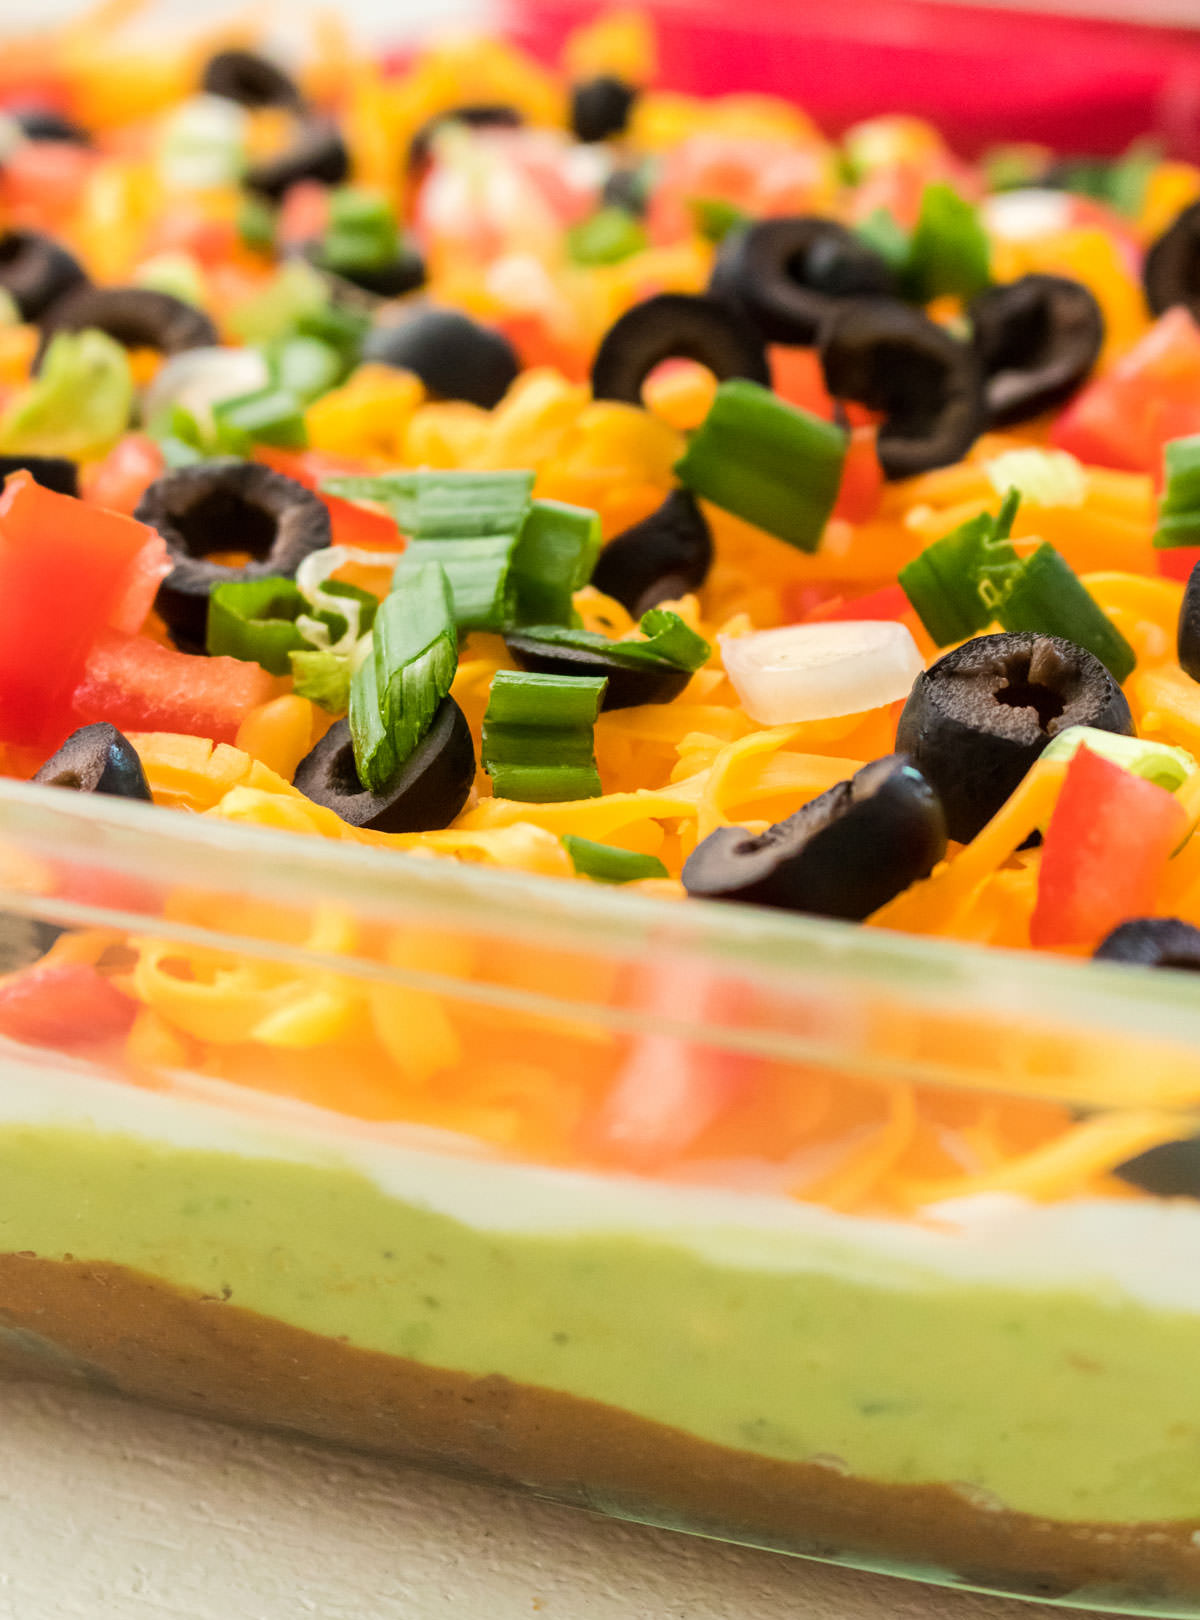 Closeup on a 9x13" glass baking dish filled with 7 layer dip sitting on a white table.